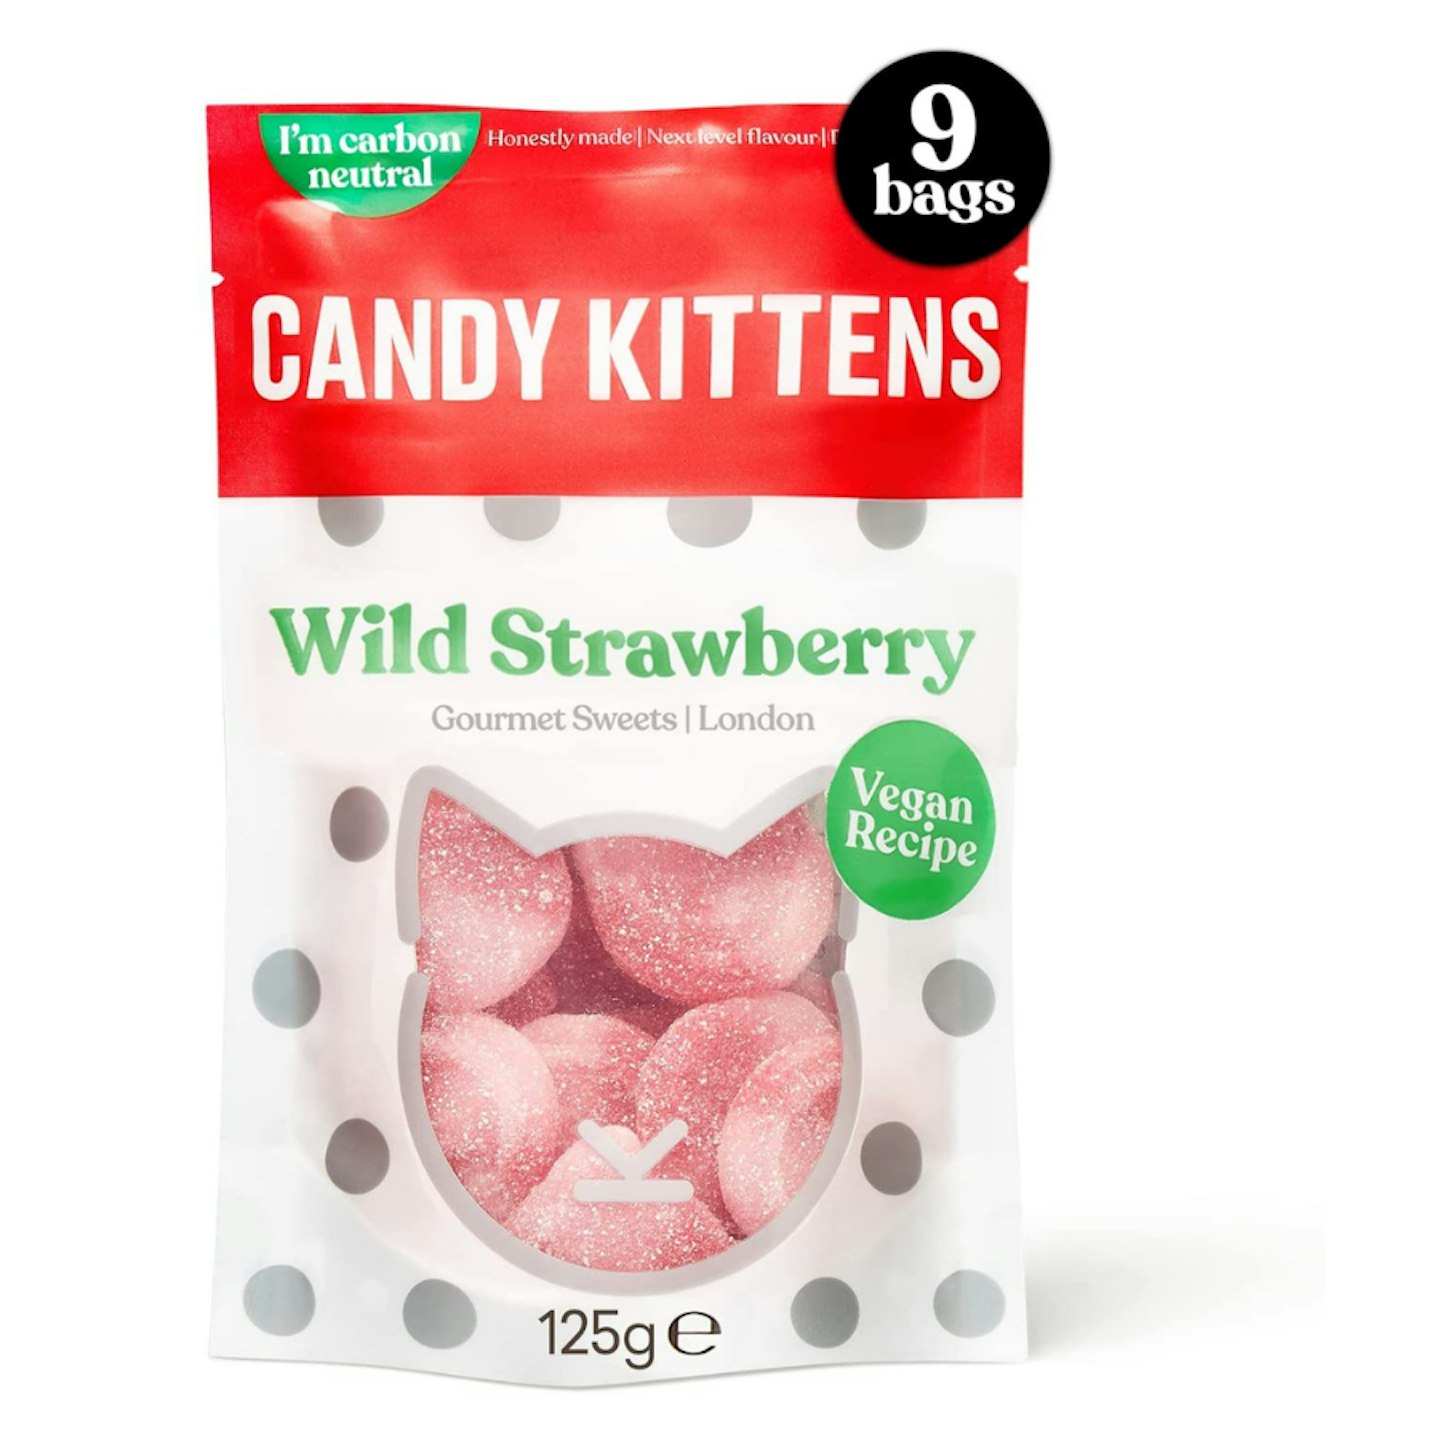 Candy Kittens Wild Strawberry Vegan Sweets